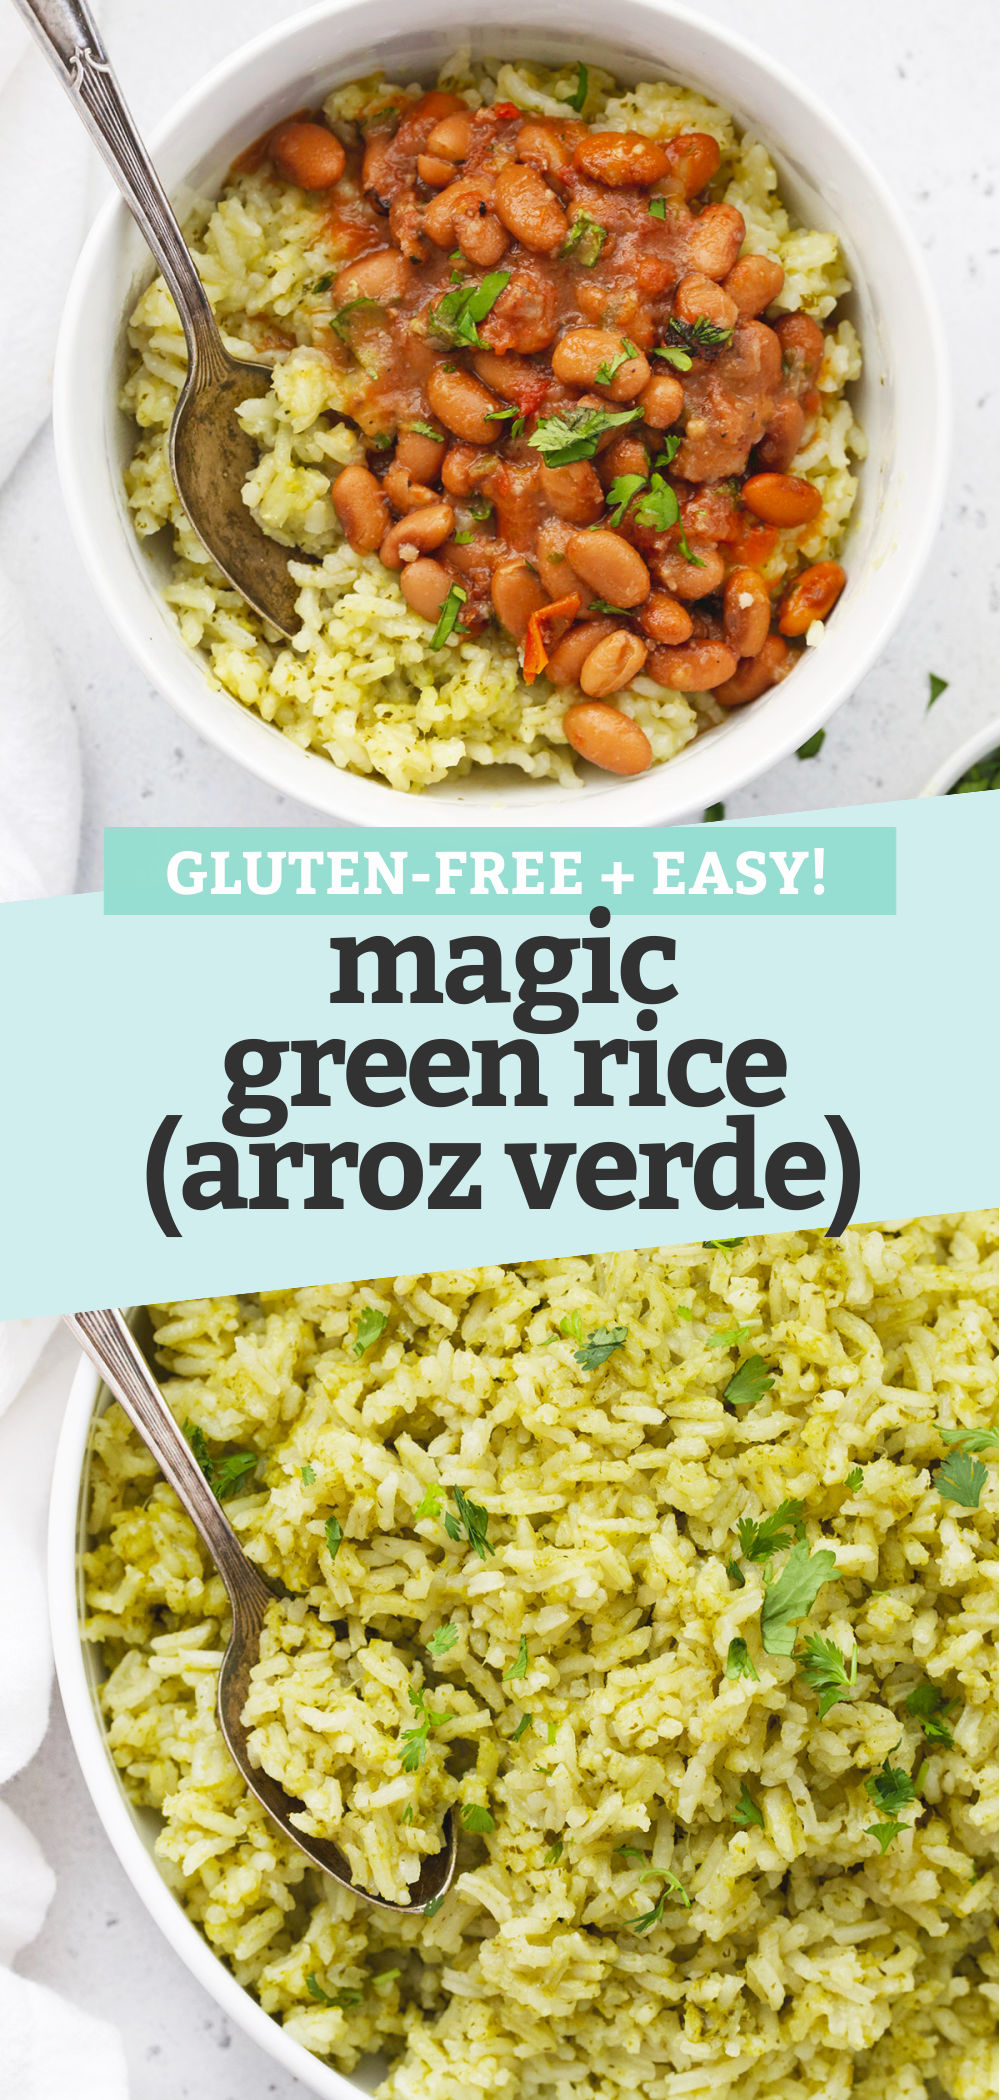 Collage of images of Mexican Green Rice (Arroz Verde) with a text overlay that reads "Gluten-Free + Easy Magic Green Rice (Arroz Verde)."